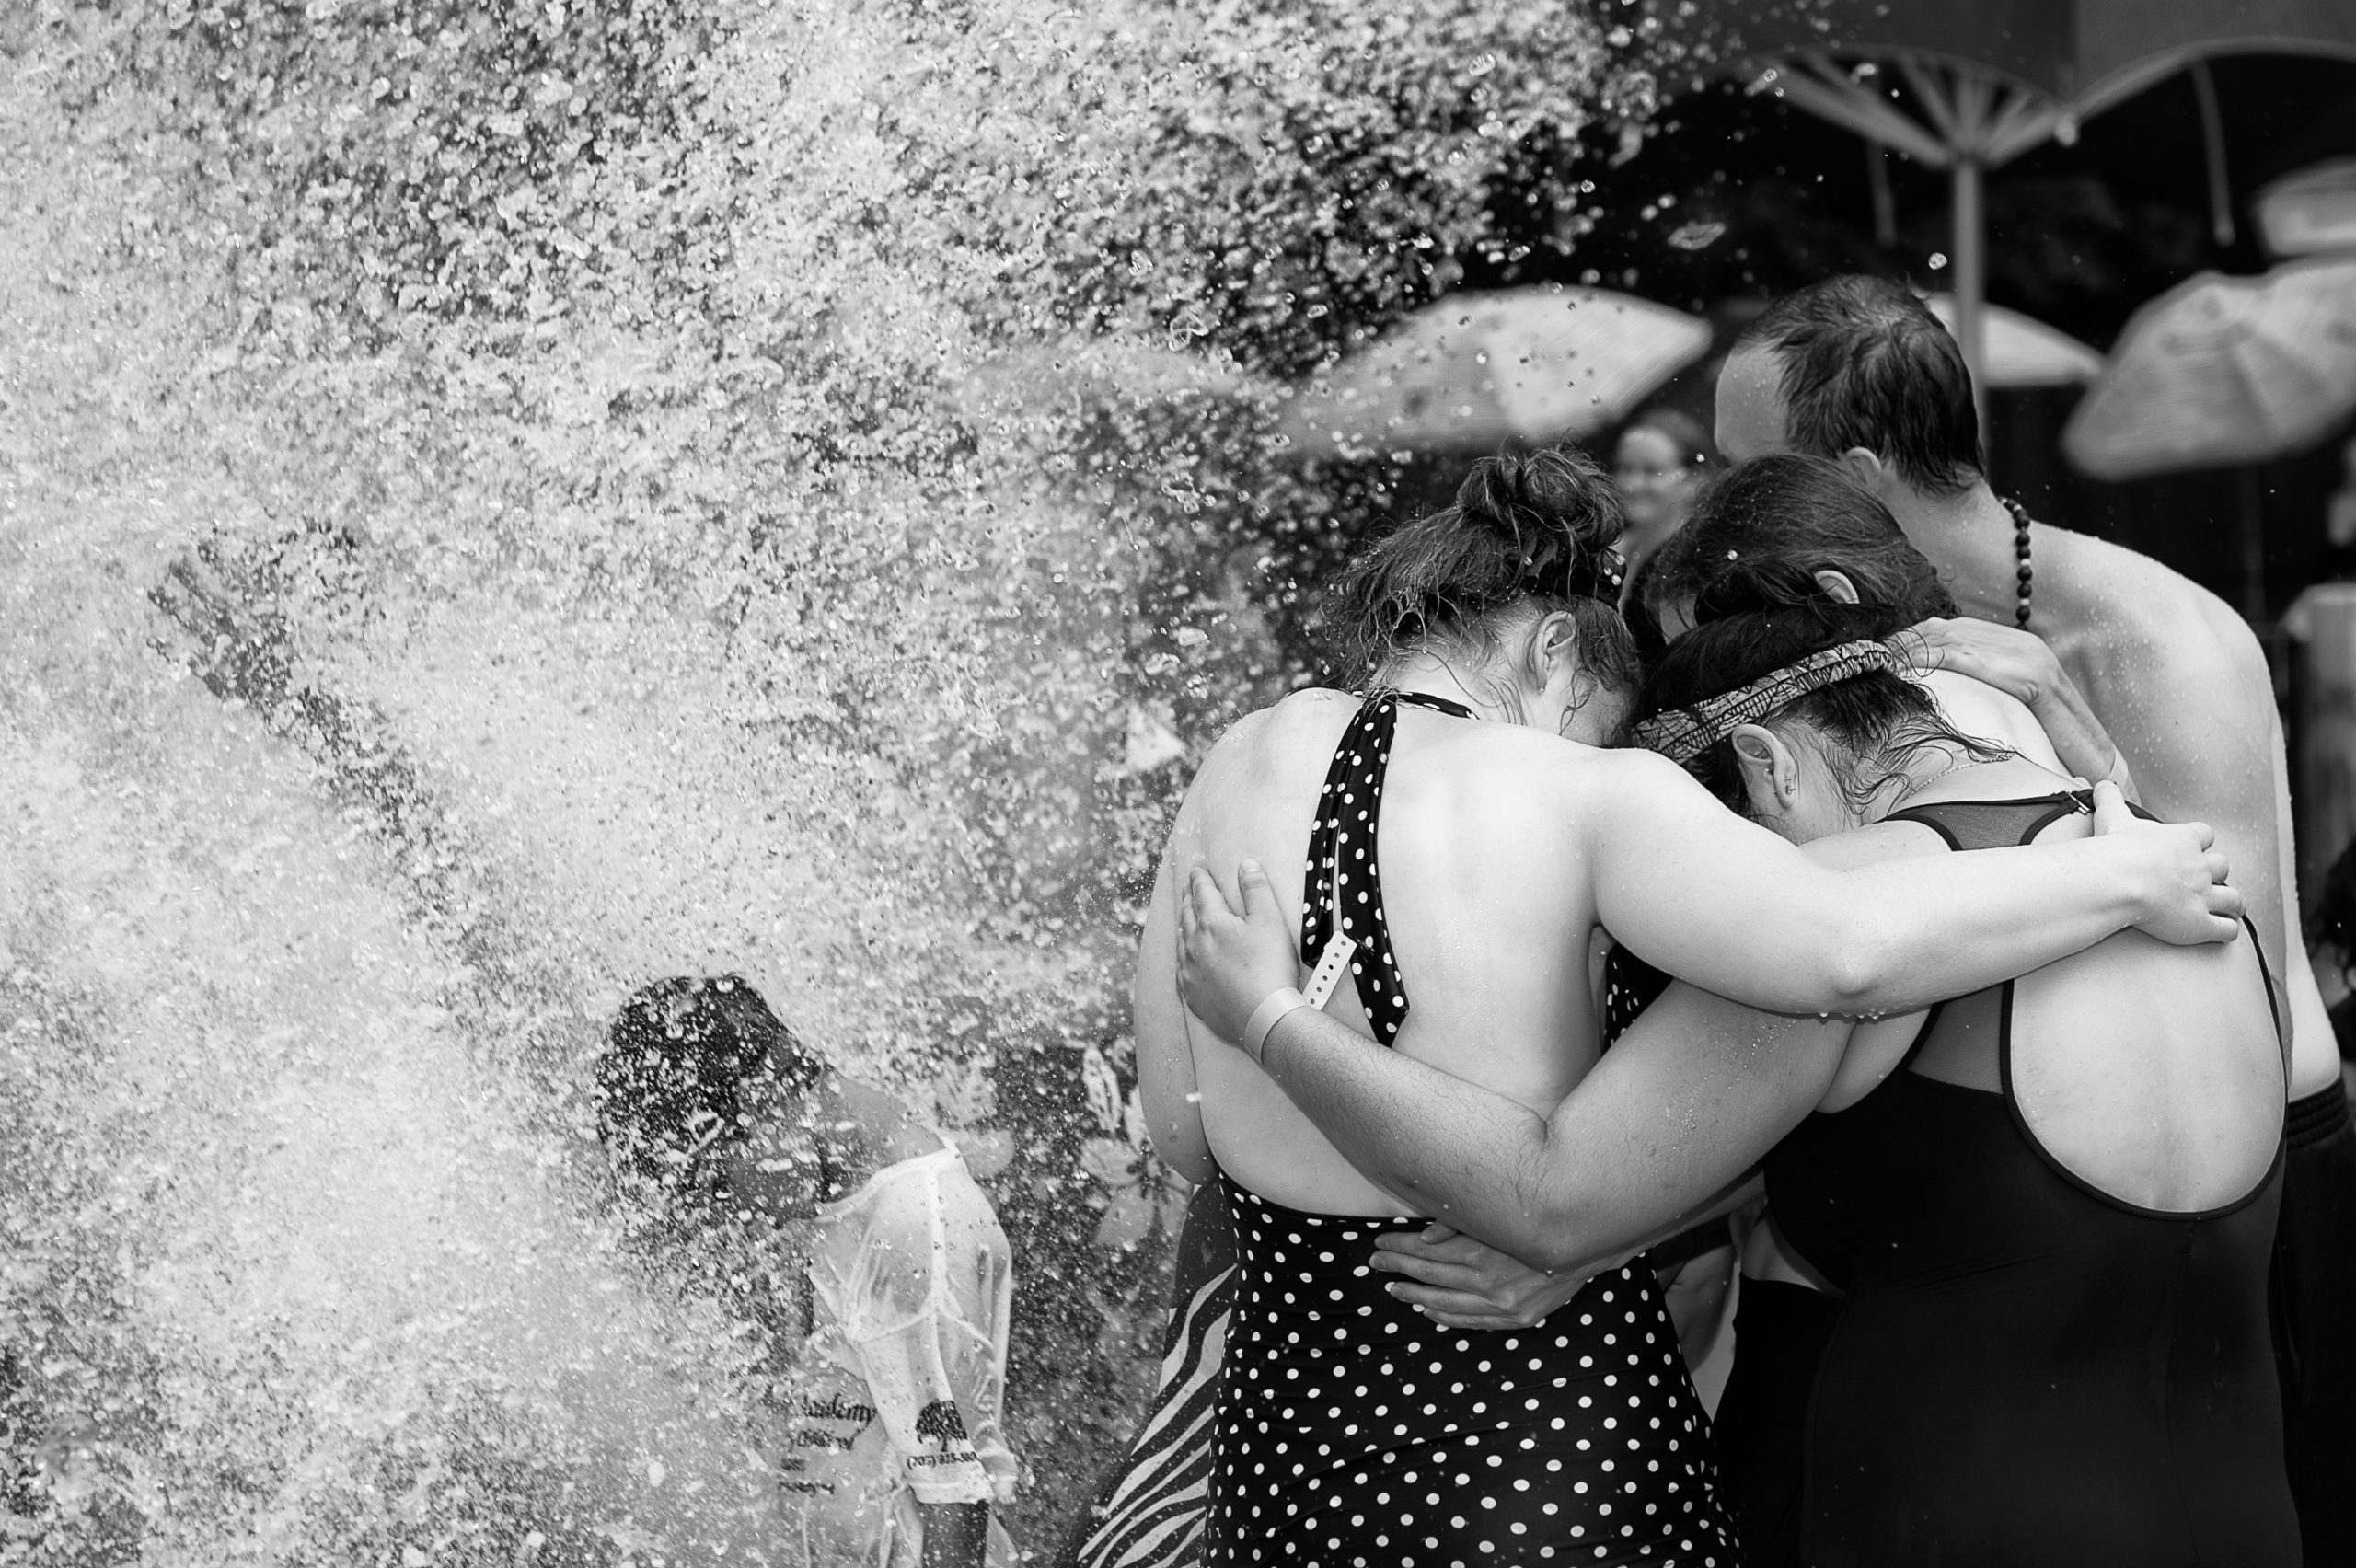 Women in bathing suits at a water park put their arms around each to shelter from a wave of water.